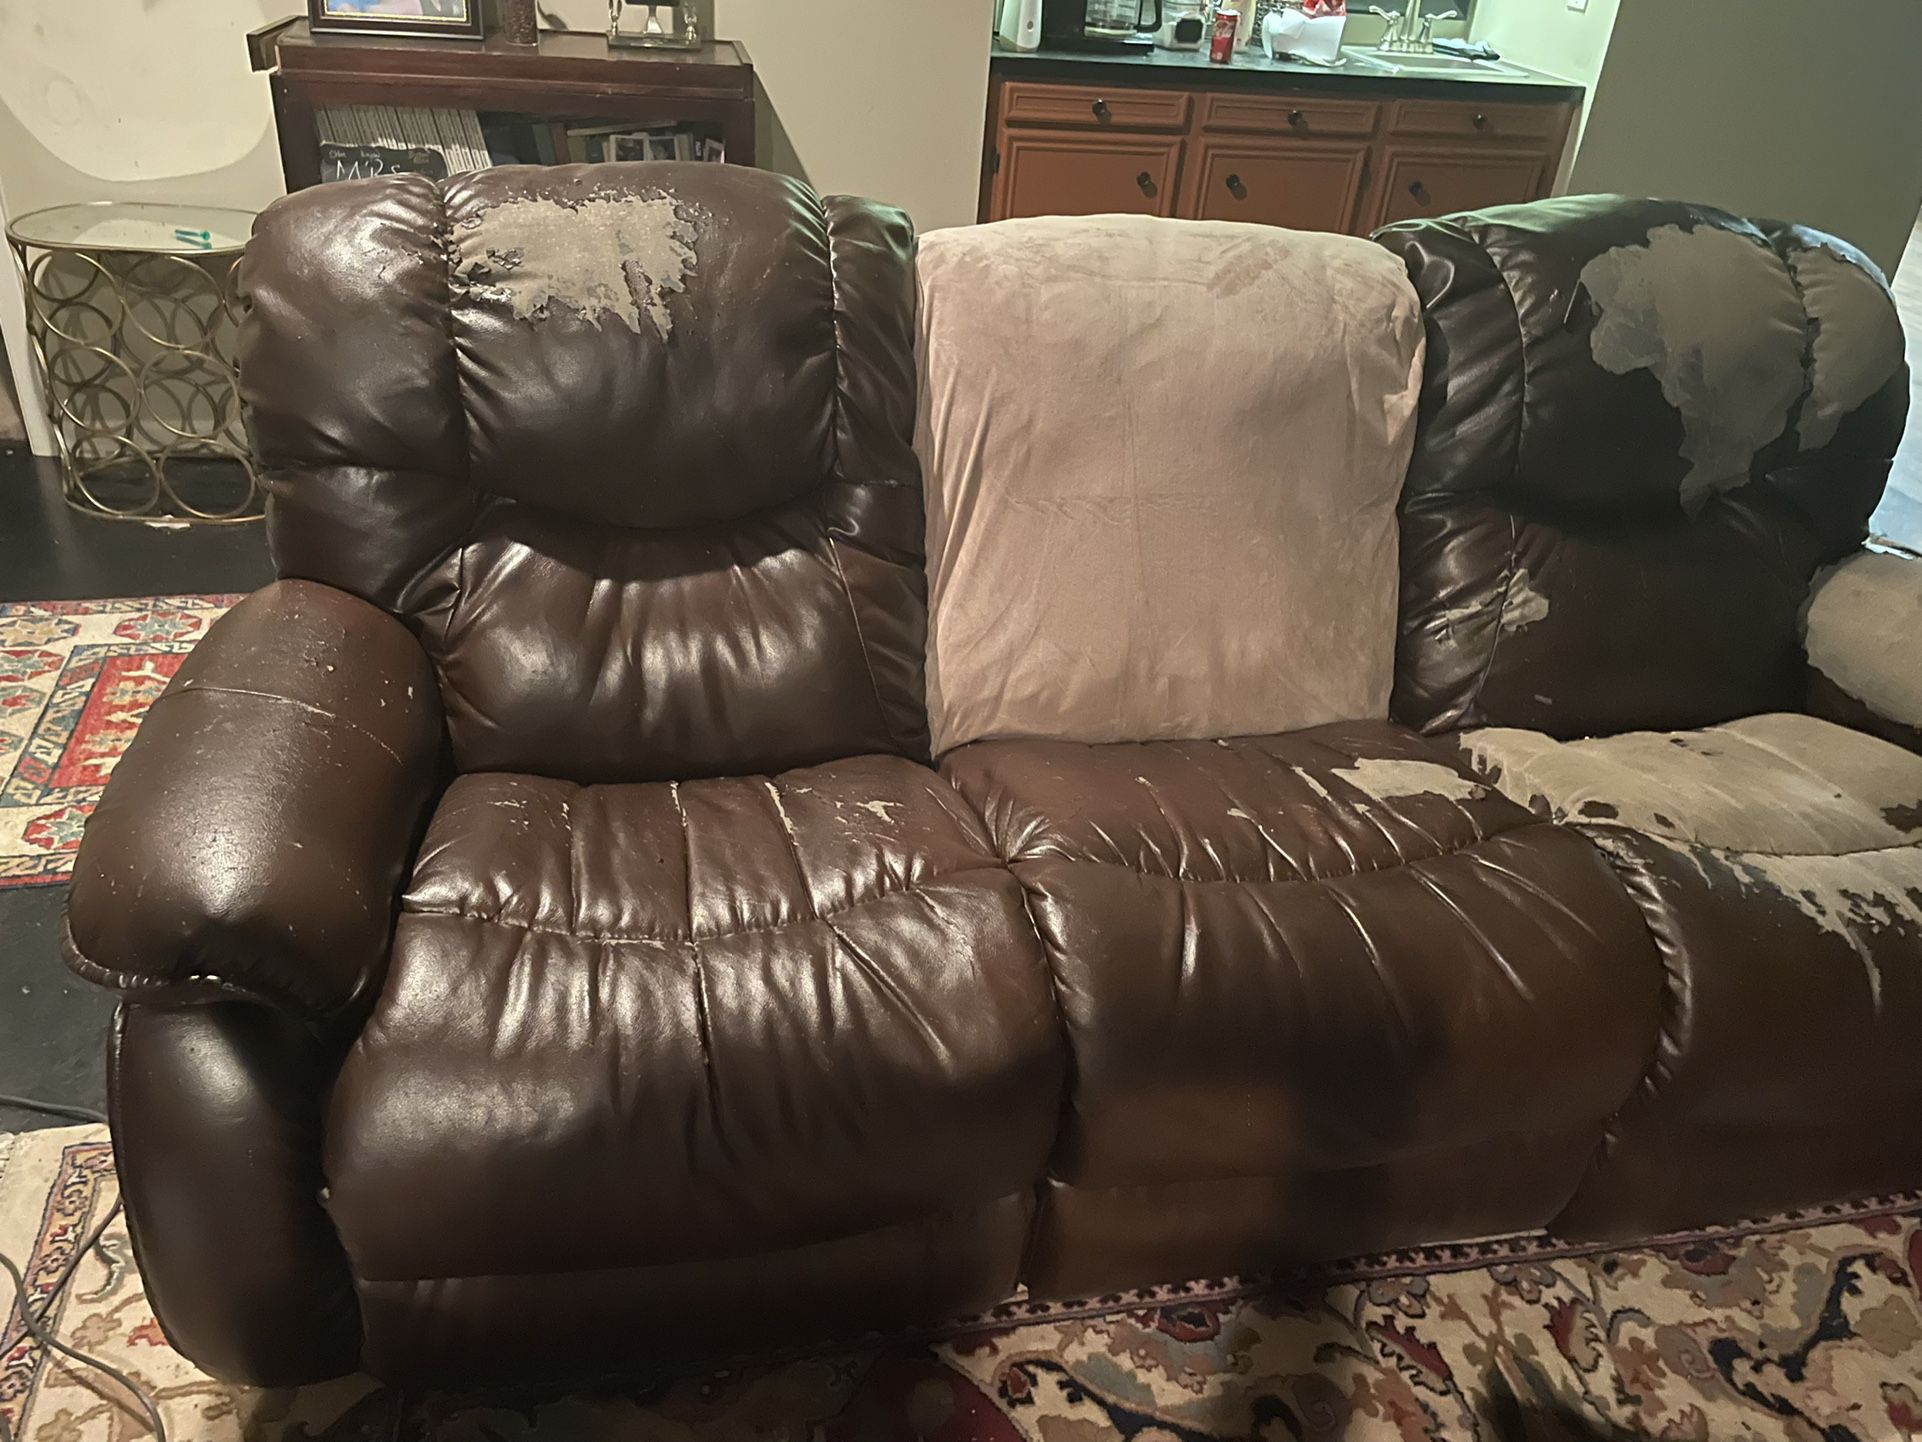 3 Seater Reclining Sofa With New Luxury Cover (EX. Middle Top Coushin) $180 OBO